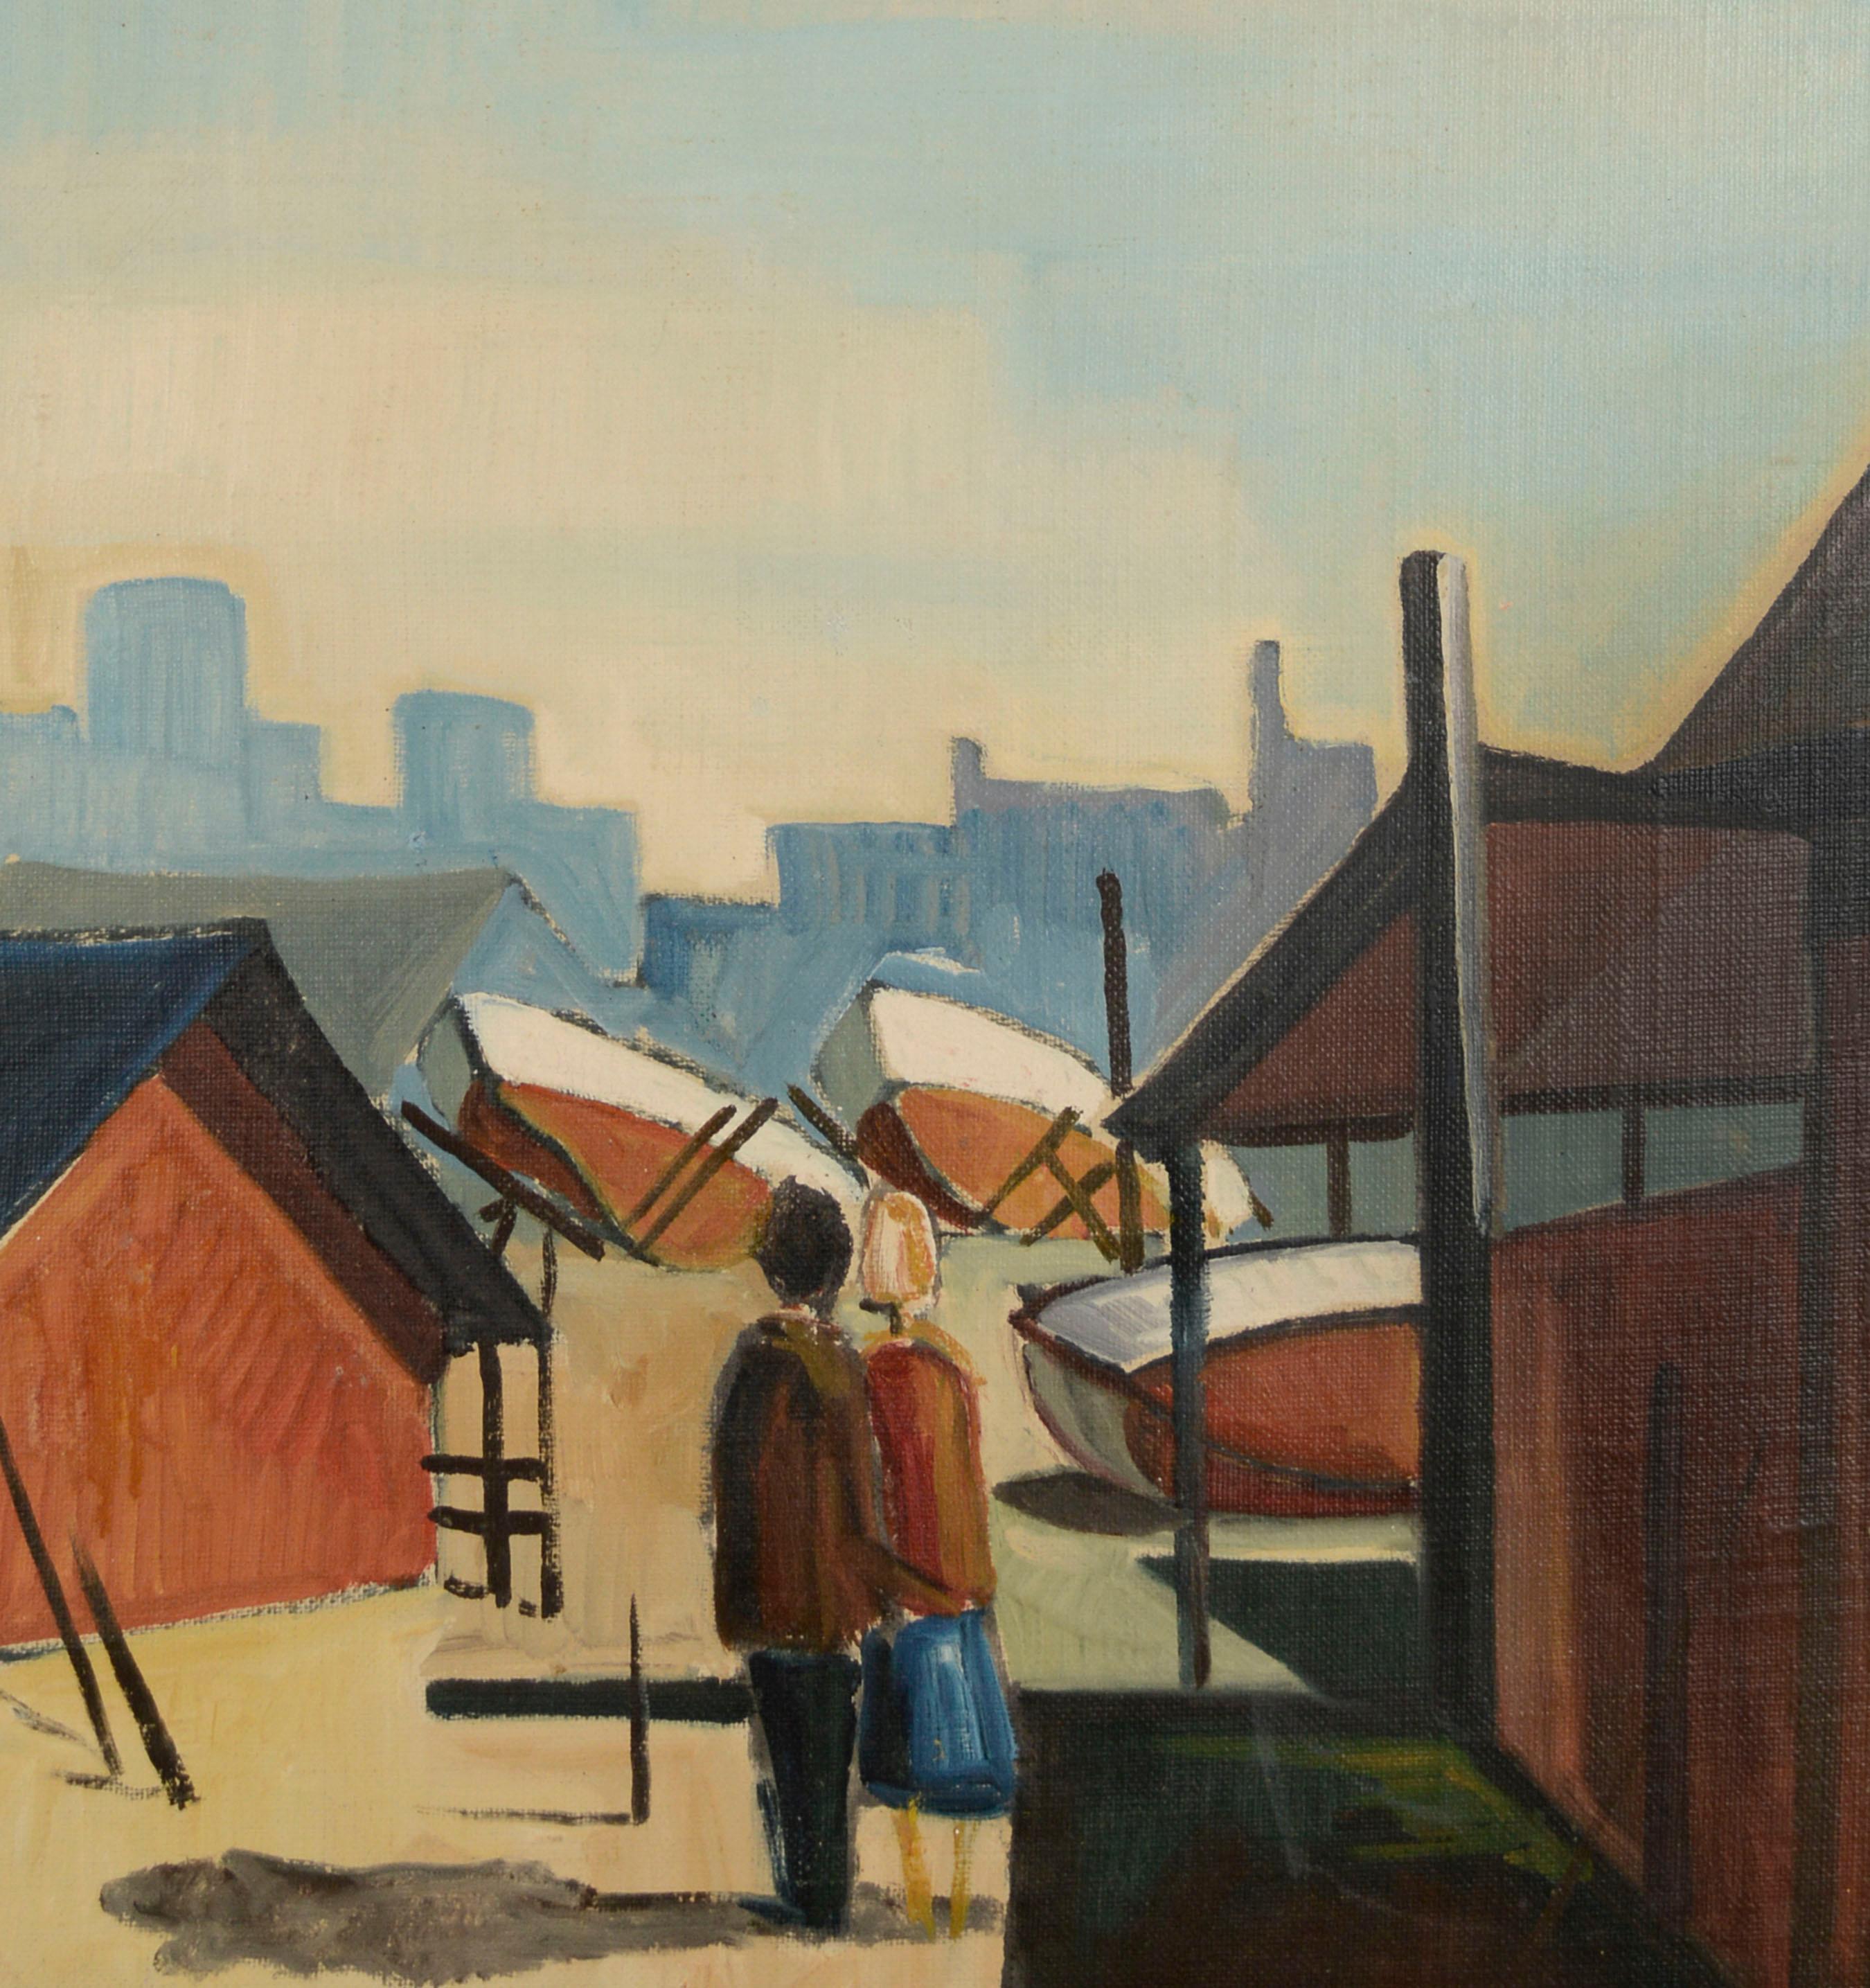 Couple at the Harbor, Mid Century Modern Figurative Cityscape  - American Modern Painting by Unknown